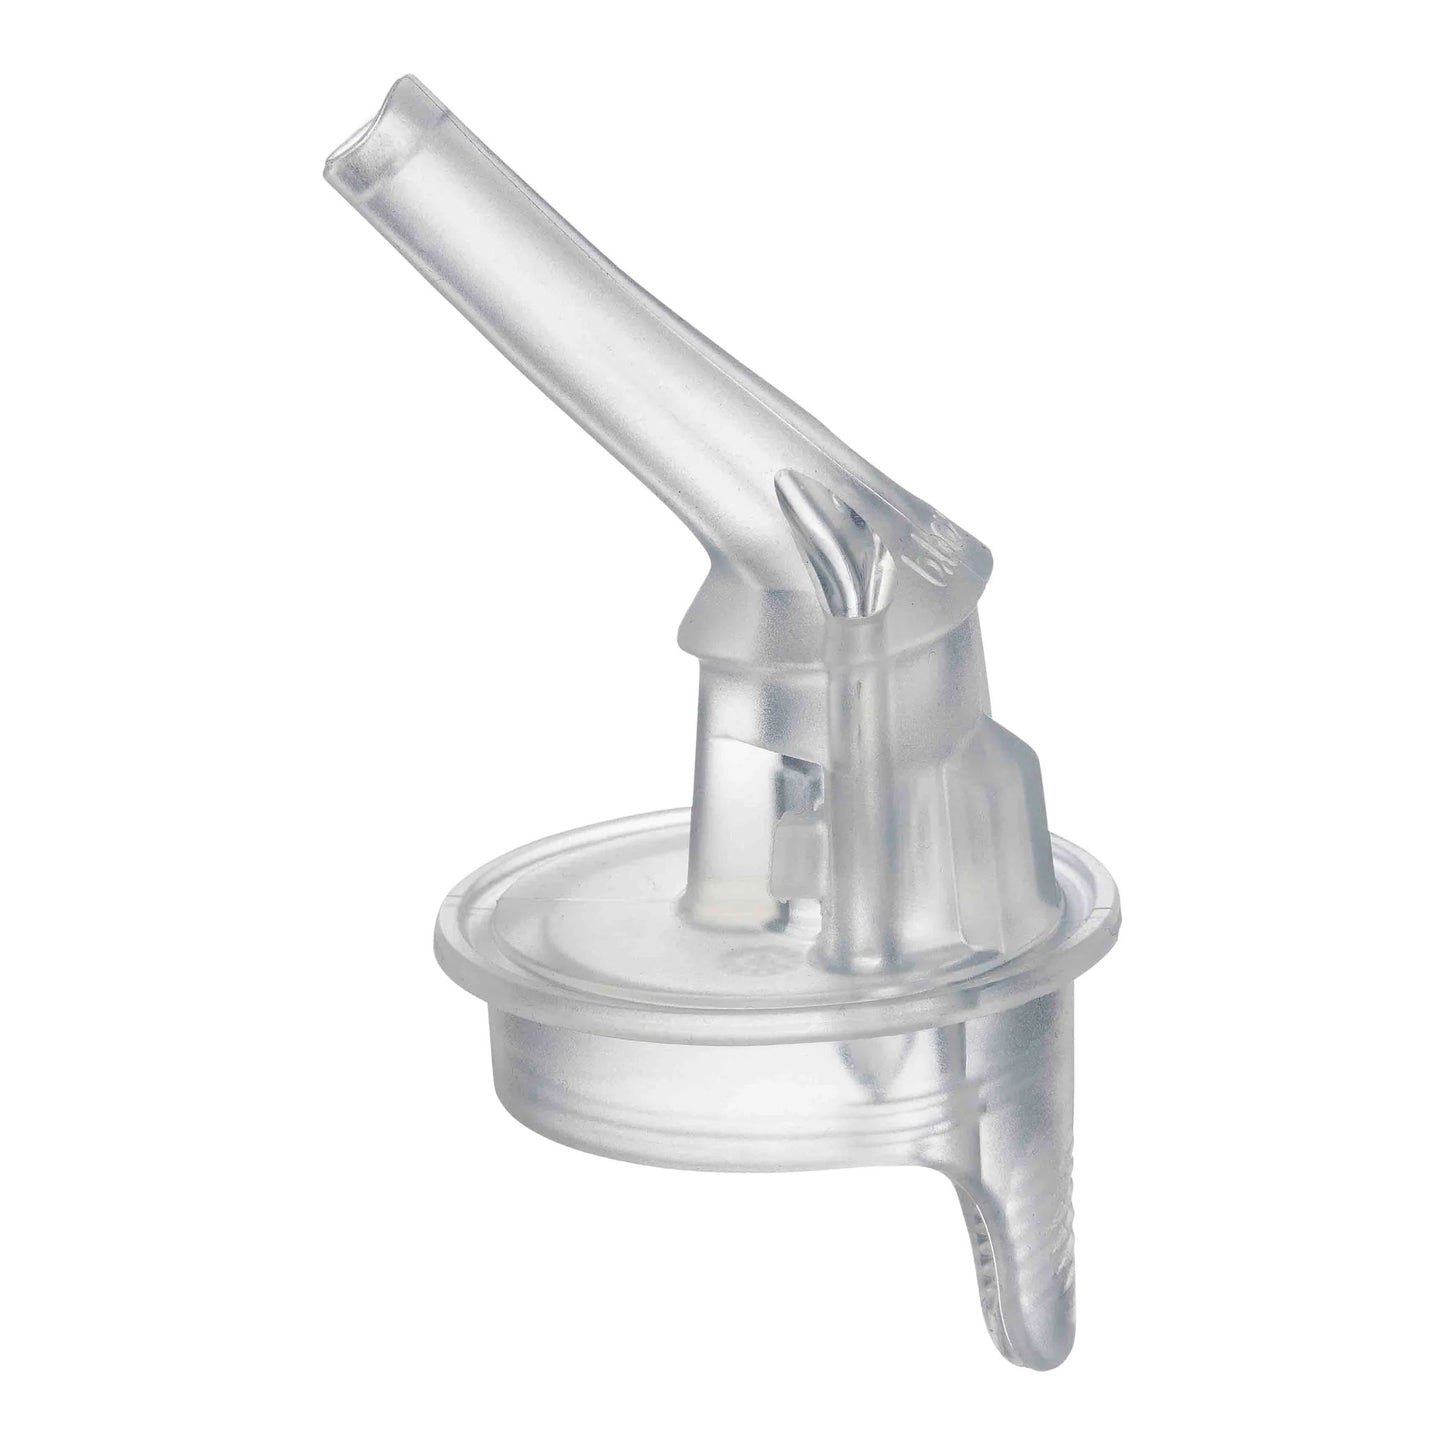 b.box Drink Bottle Replacement Straw Tops (2pk)